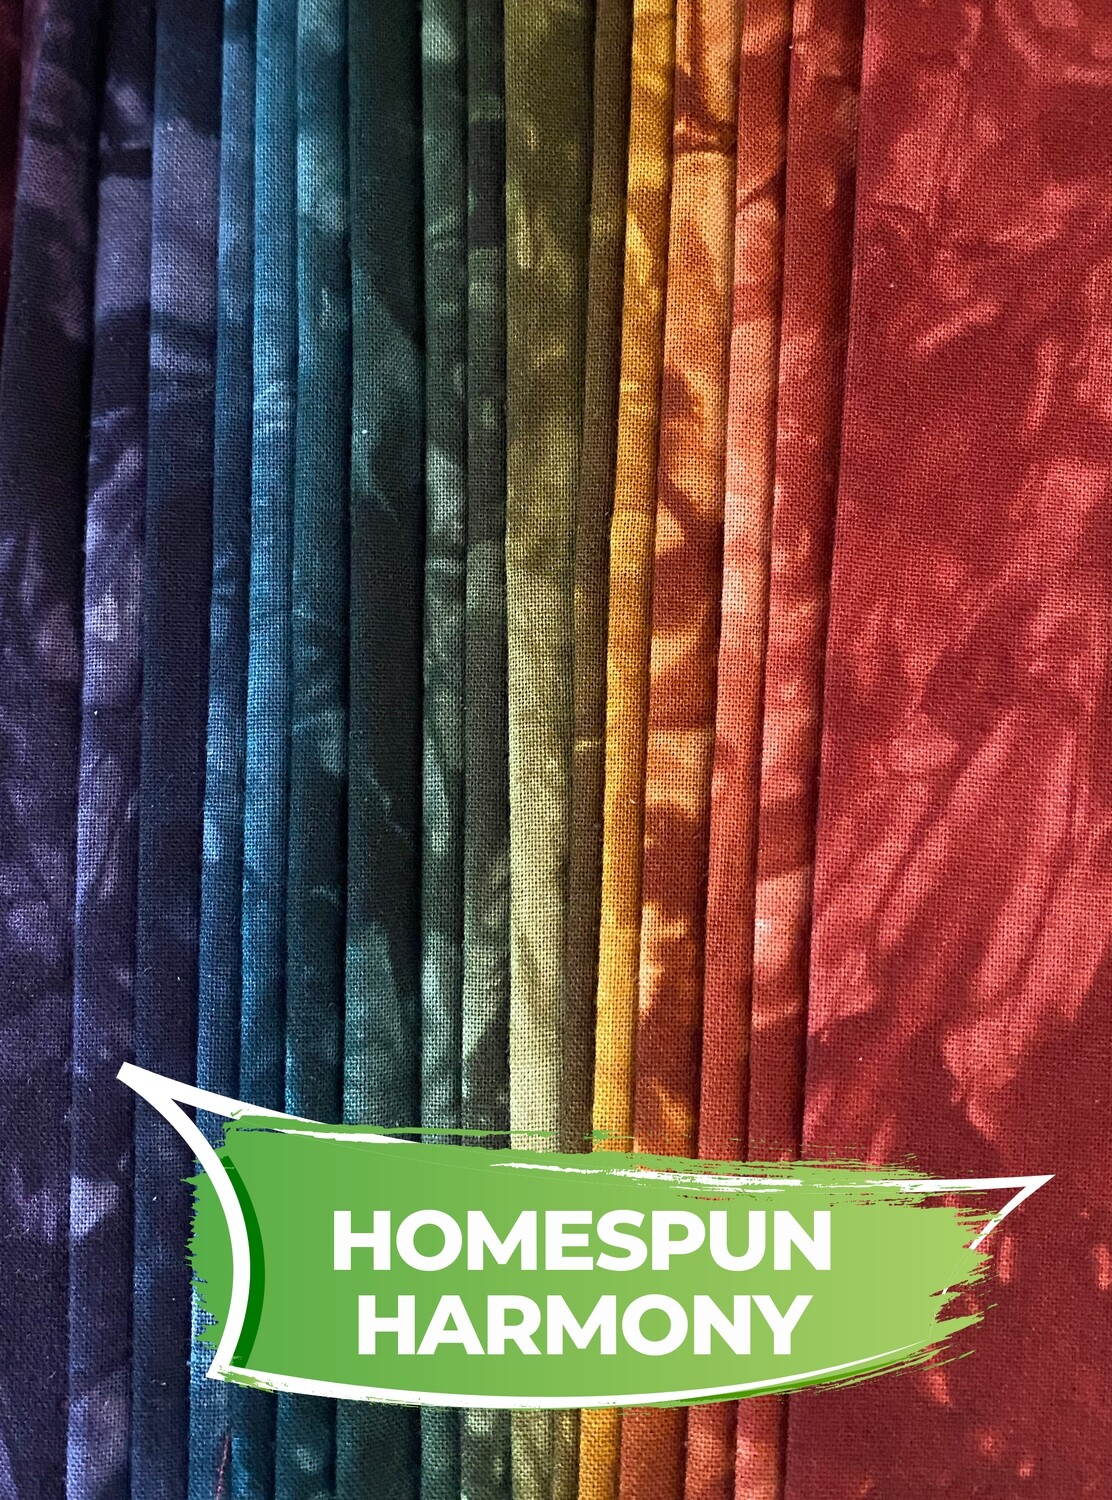 Homespun Harmony Hand Dyed Charm Pack of 20 colors - 6